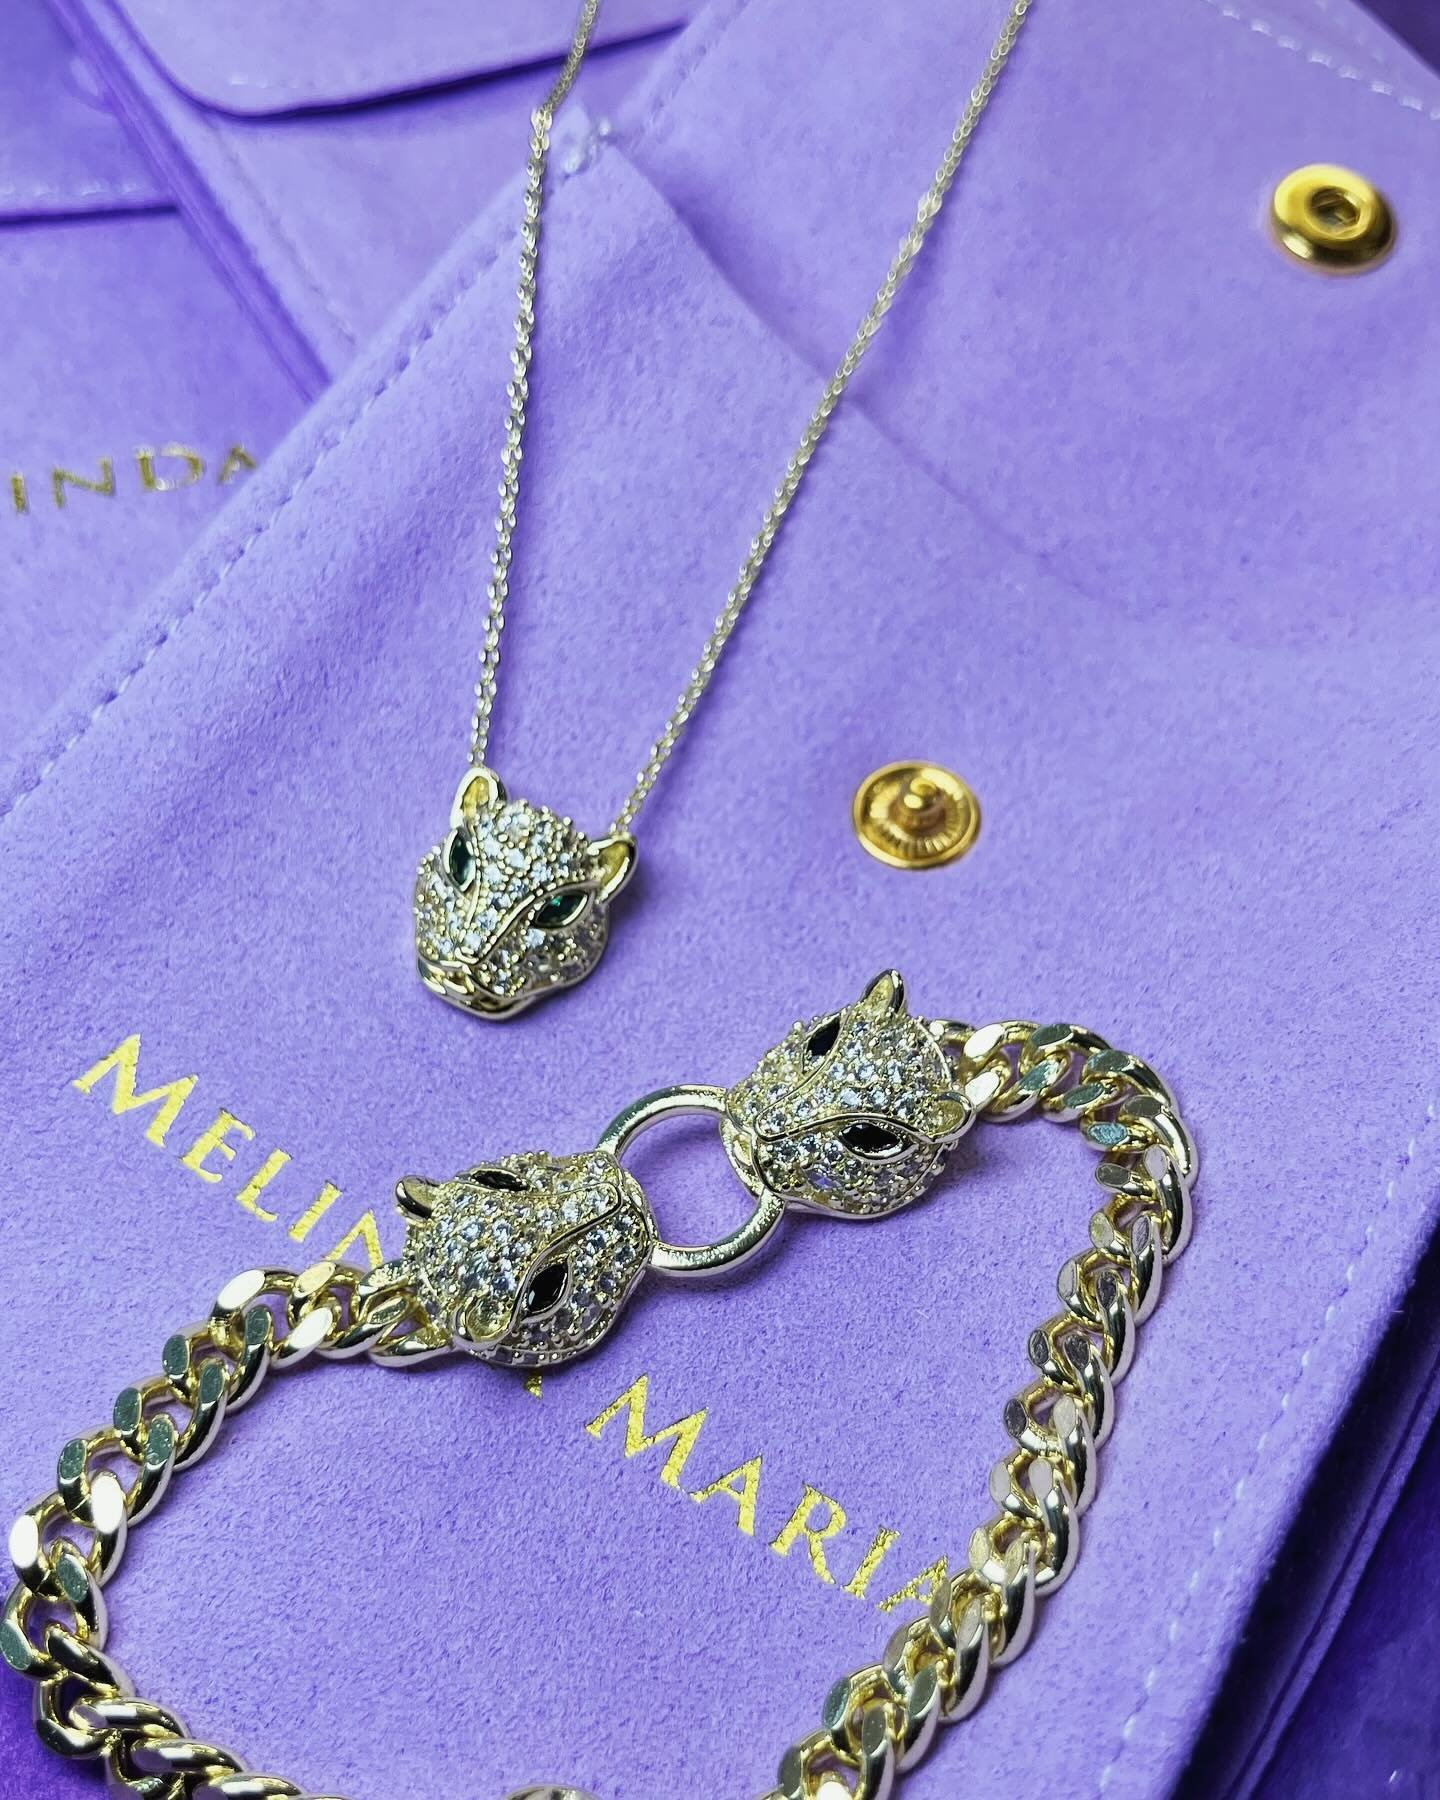 My favorite kind of mail 💜💜💜

I just got some new pieces in from @melindamaria_jewelry and cannot wait to style them in different ways 🤩.

Shop @melindamaria_jewelry and use code TIFFANY to get $$ off your order✨

#melindamaria #melindamariajewel